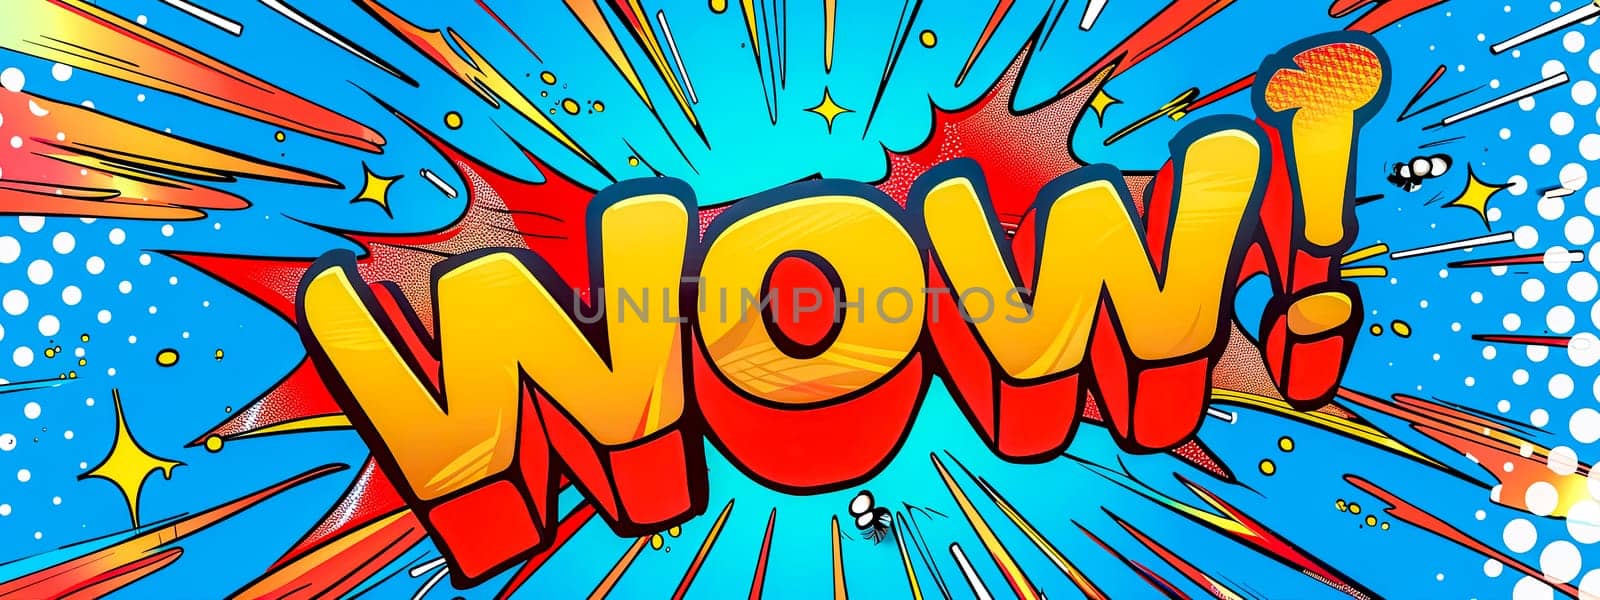 Colorful comic book wow explosion banner by Edophoto